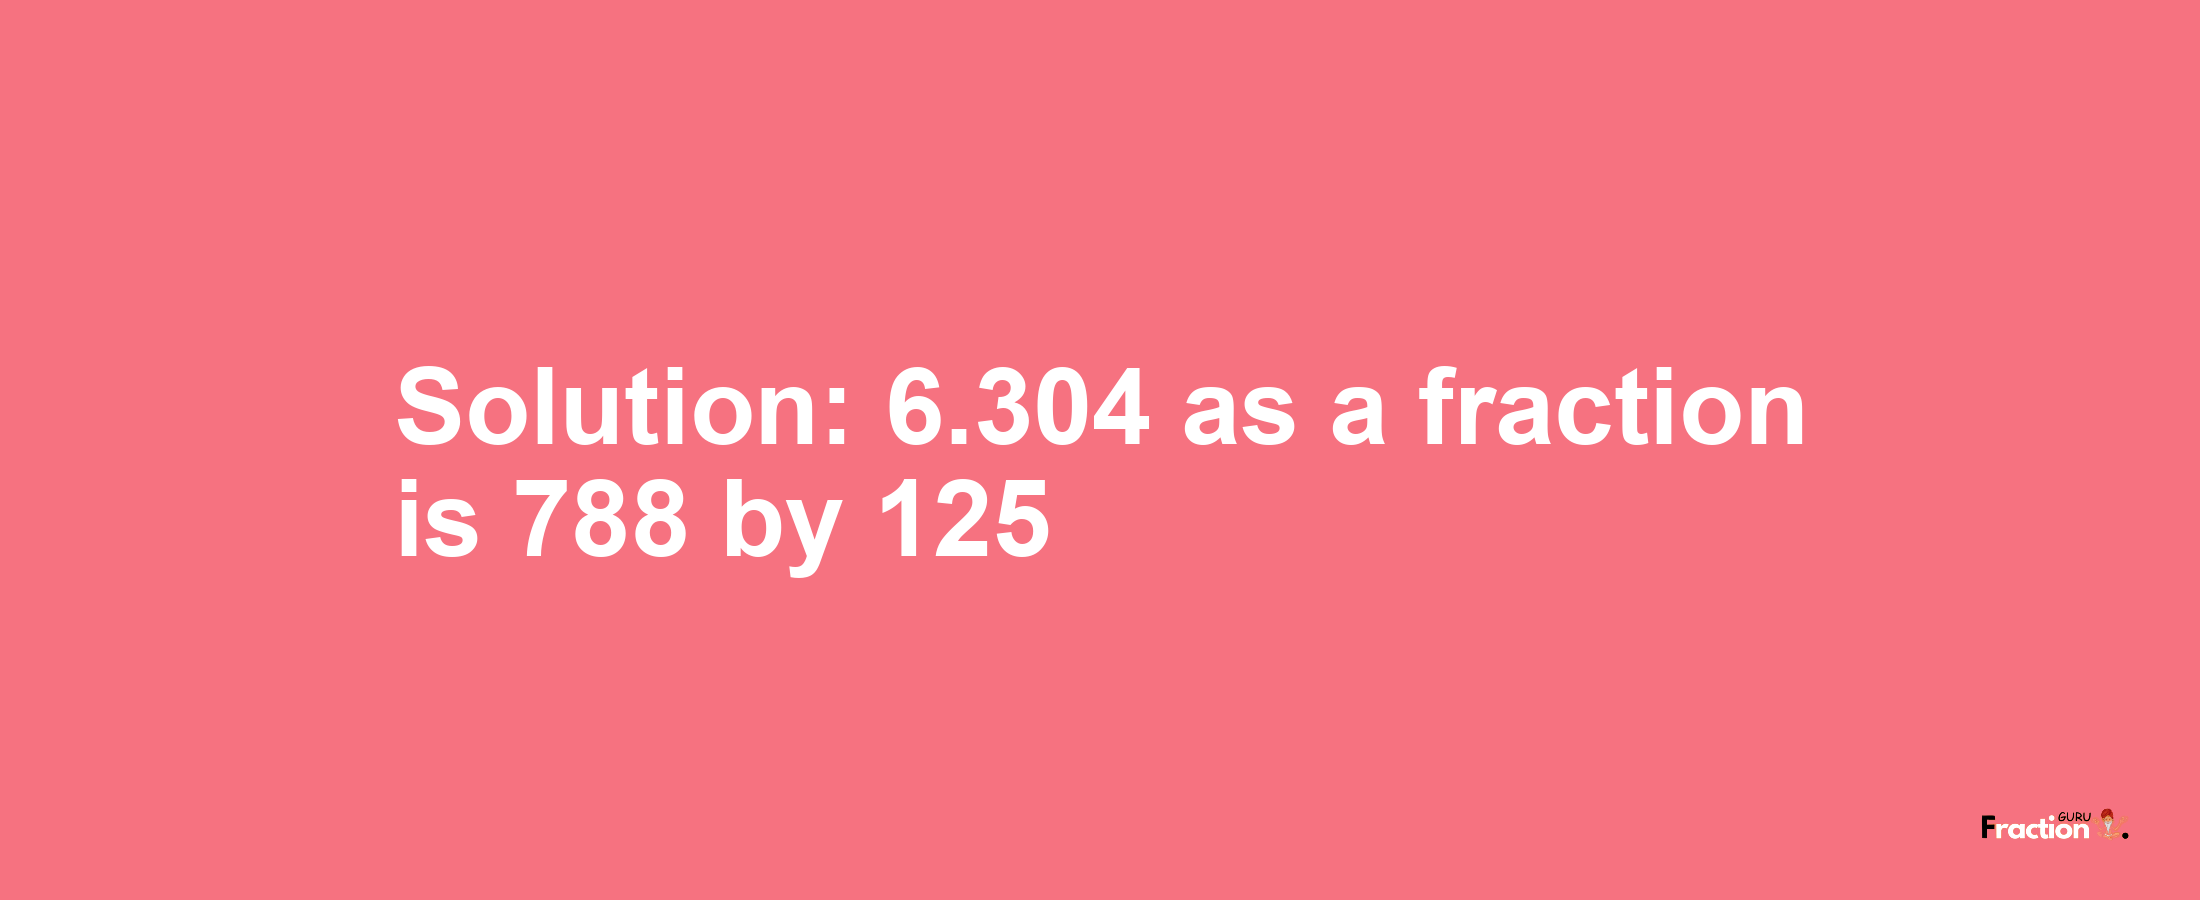 Solution:6.304 as a fraction is 788/125